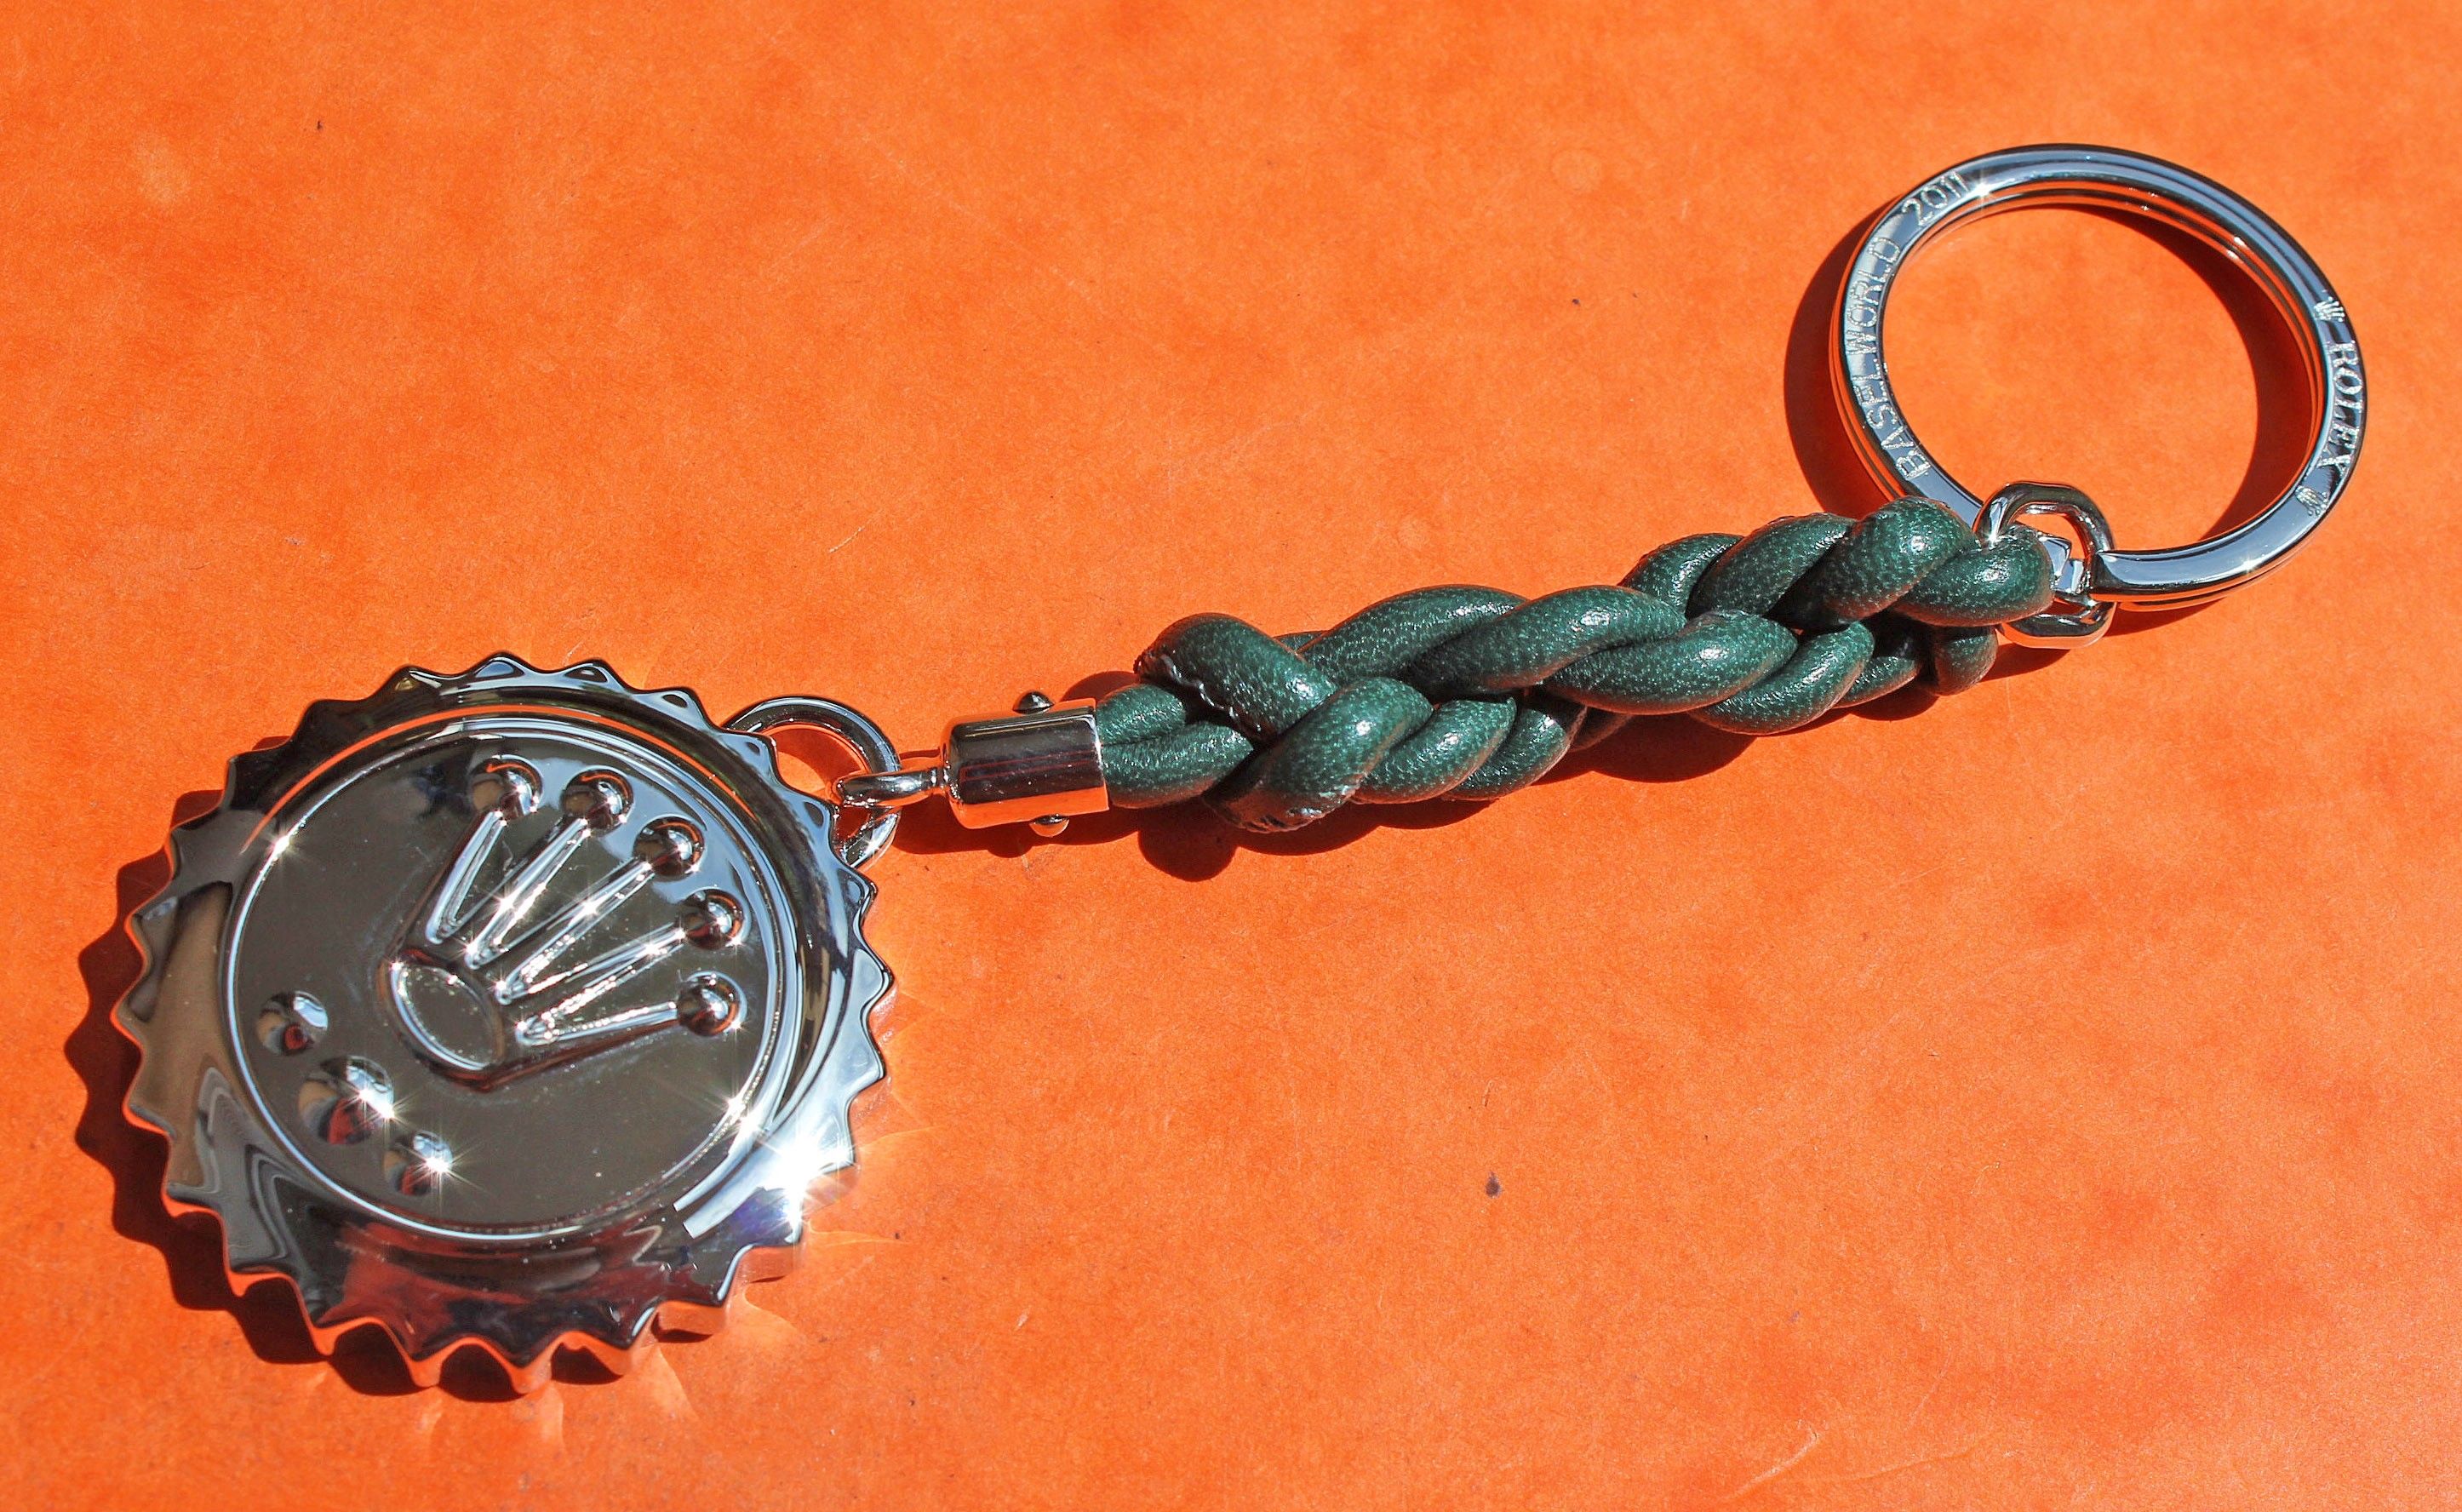 Rolex Collectible Triplock Coronet Submariner crown stainless steel key ring,  keychain, holder baselworld watch goodies